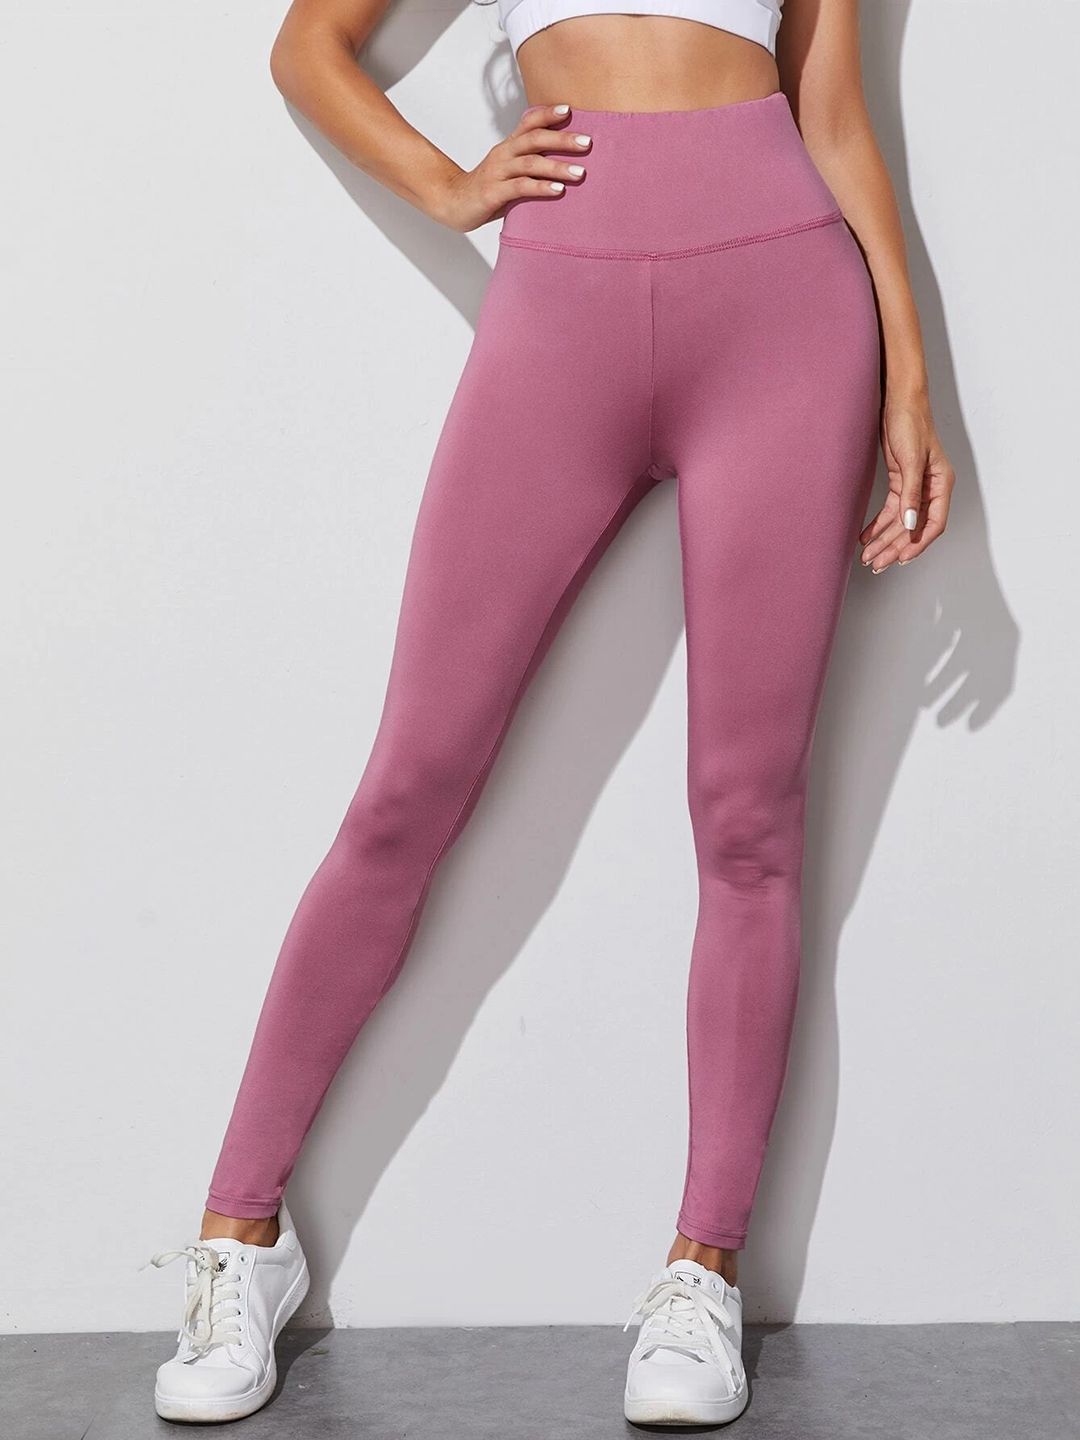 URBANIC Women Dusty Pink Solid High-Rise Gym Tights with Ruched Back Price in India